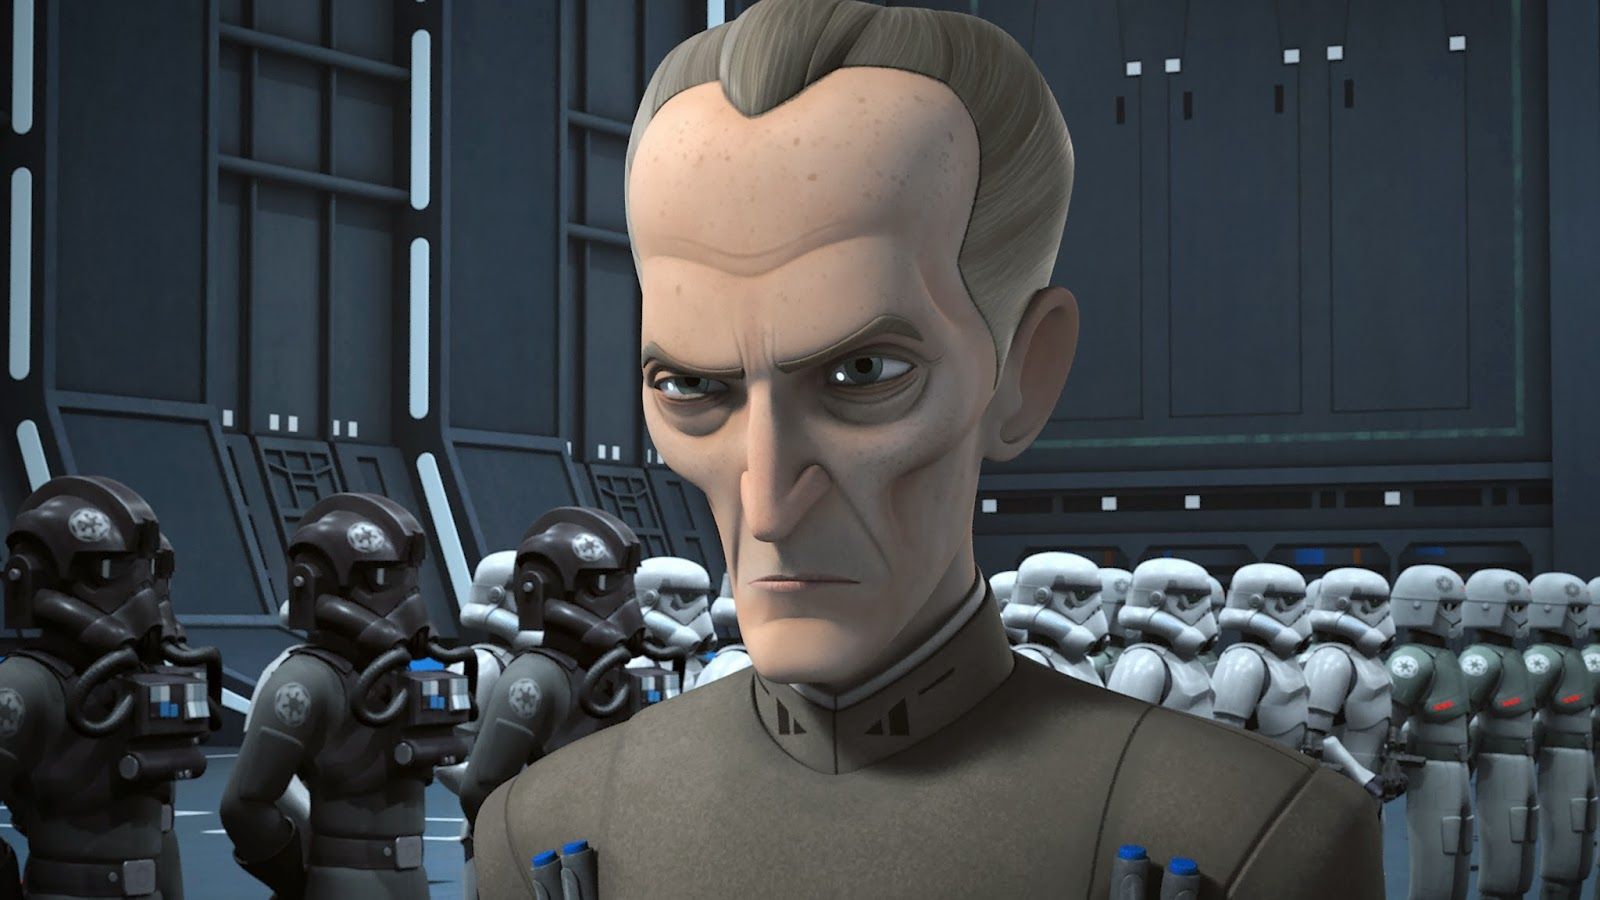 Grand Moff Tarkin Arrives In STAR WARS REBELS. Check Out These Video Clips And Photo. Star wars villains, Star wars awesome, Star wars rebels